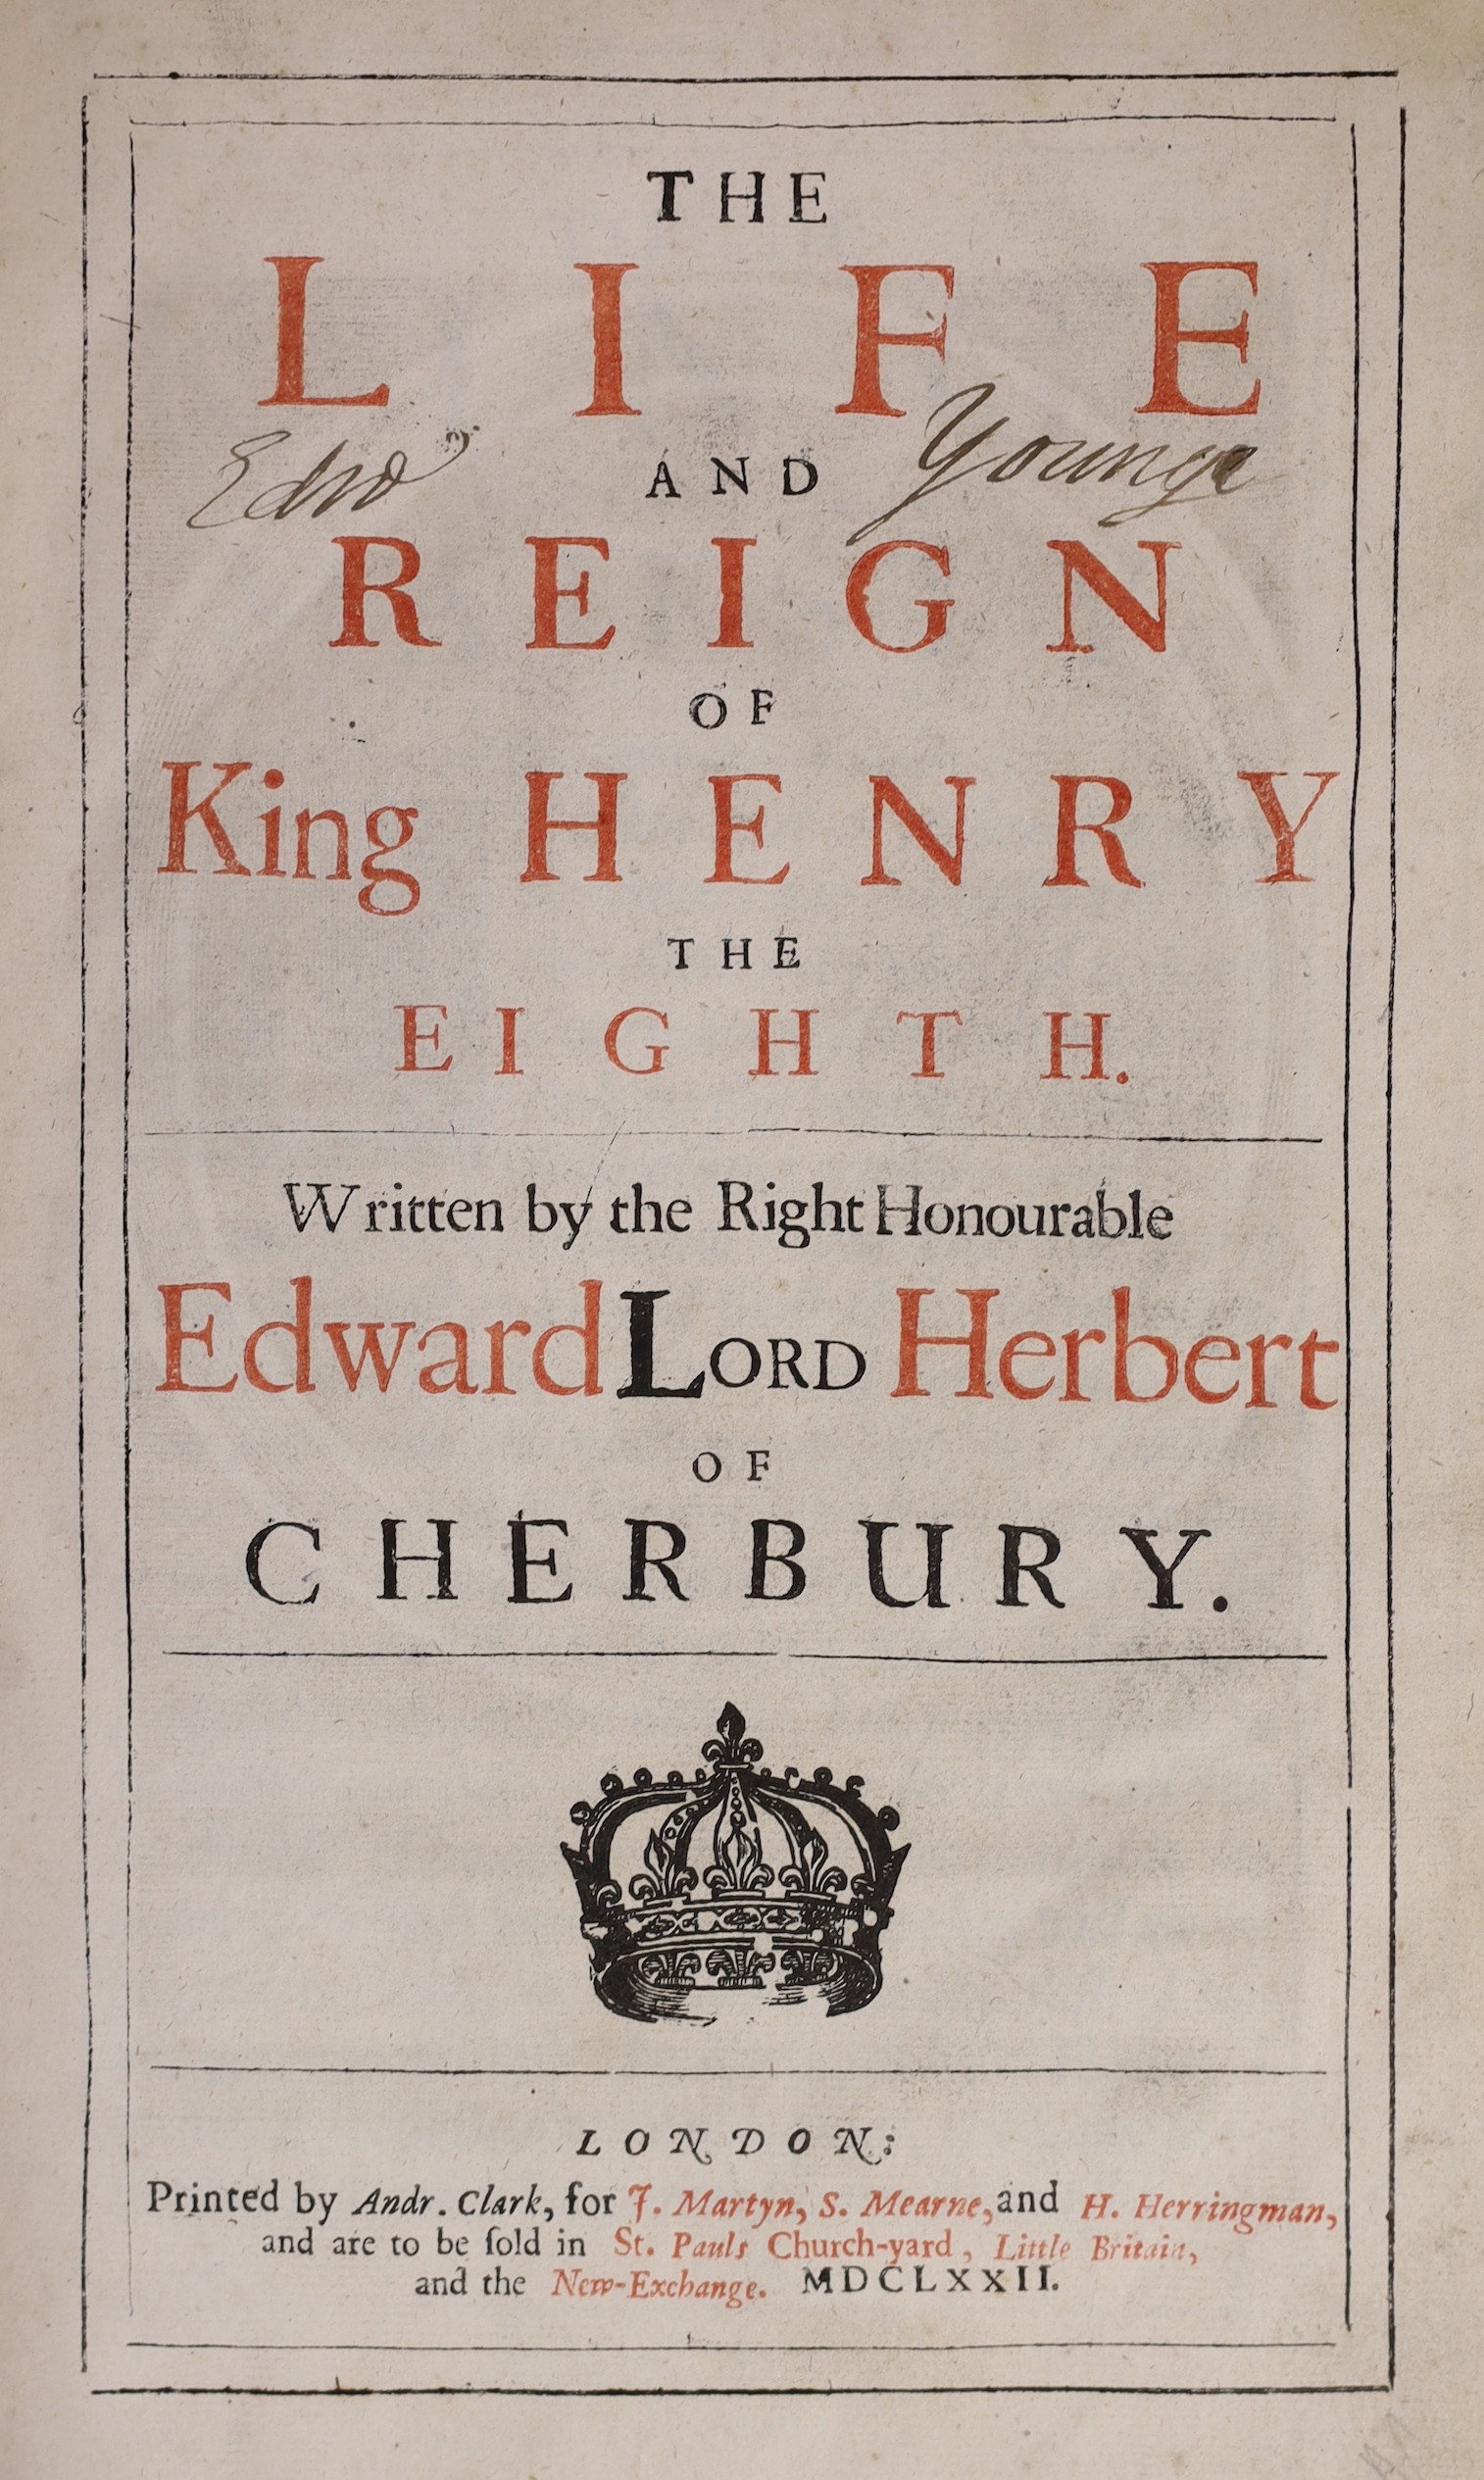 Herbert of Cherbury, Edward, Lord - The Life and Reign of King Henry the Eighth, small folio, calf, rebacked, with engraved portrait frontis, later red ink signature to inner front board, Andr. Clark, for J. Martyn et al